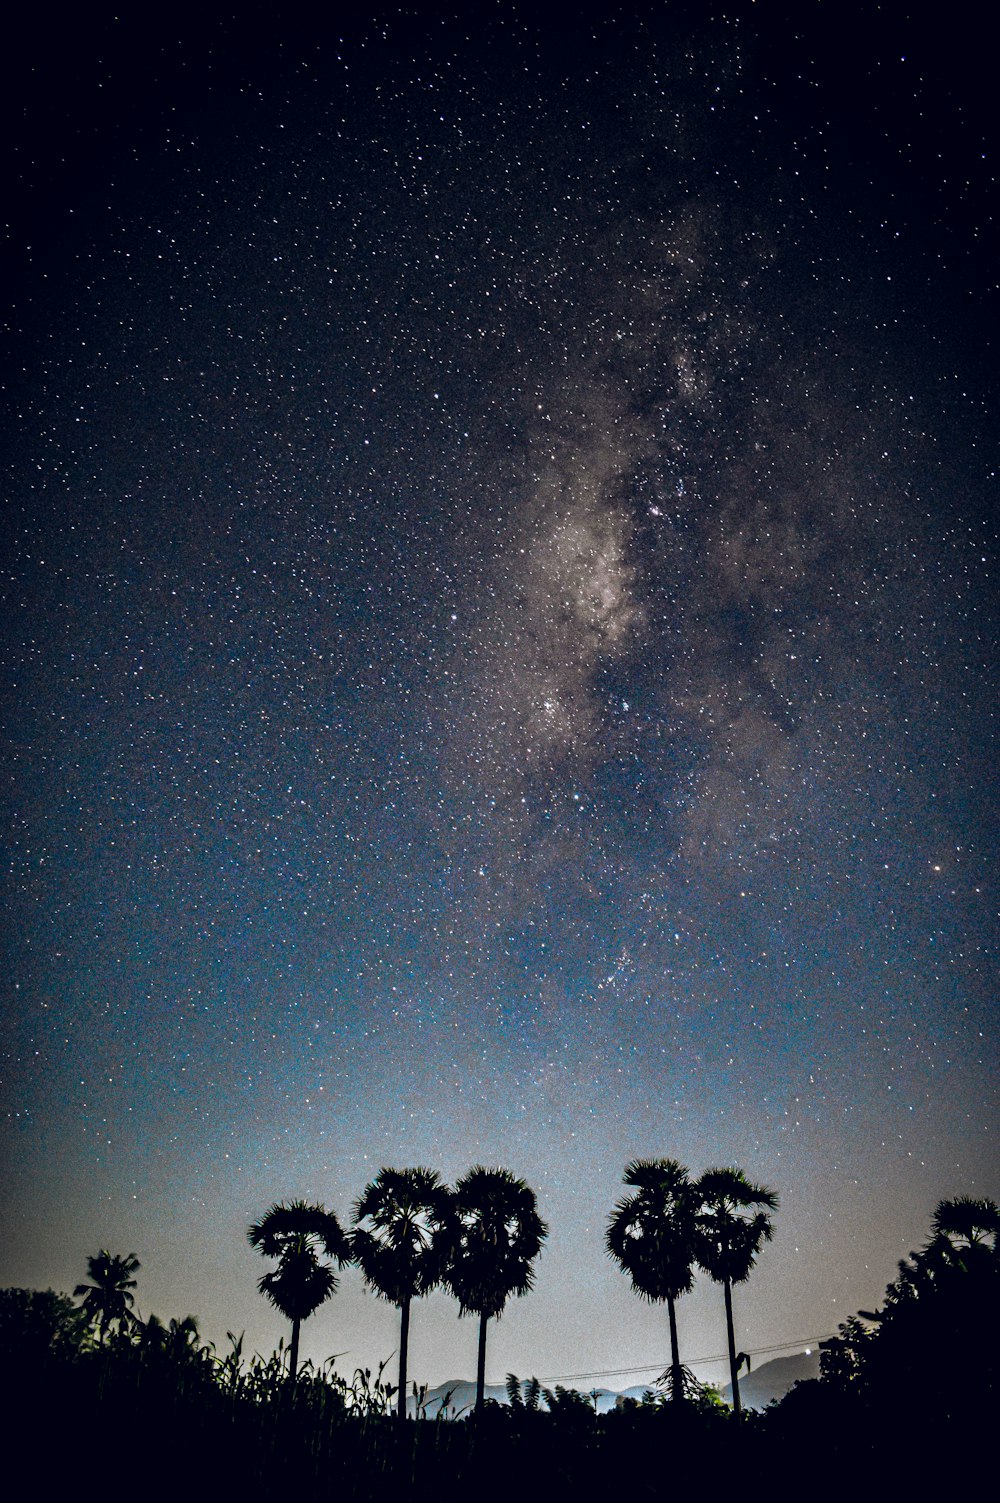 a sky view looking up at night